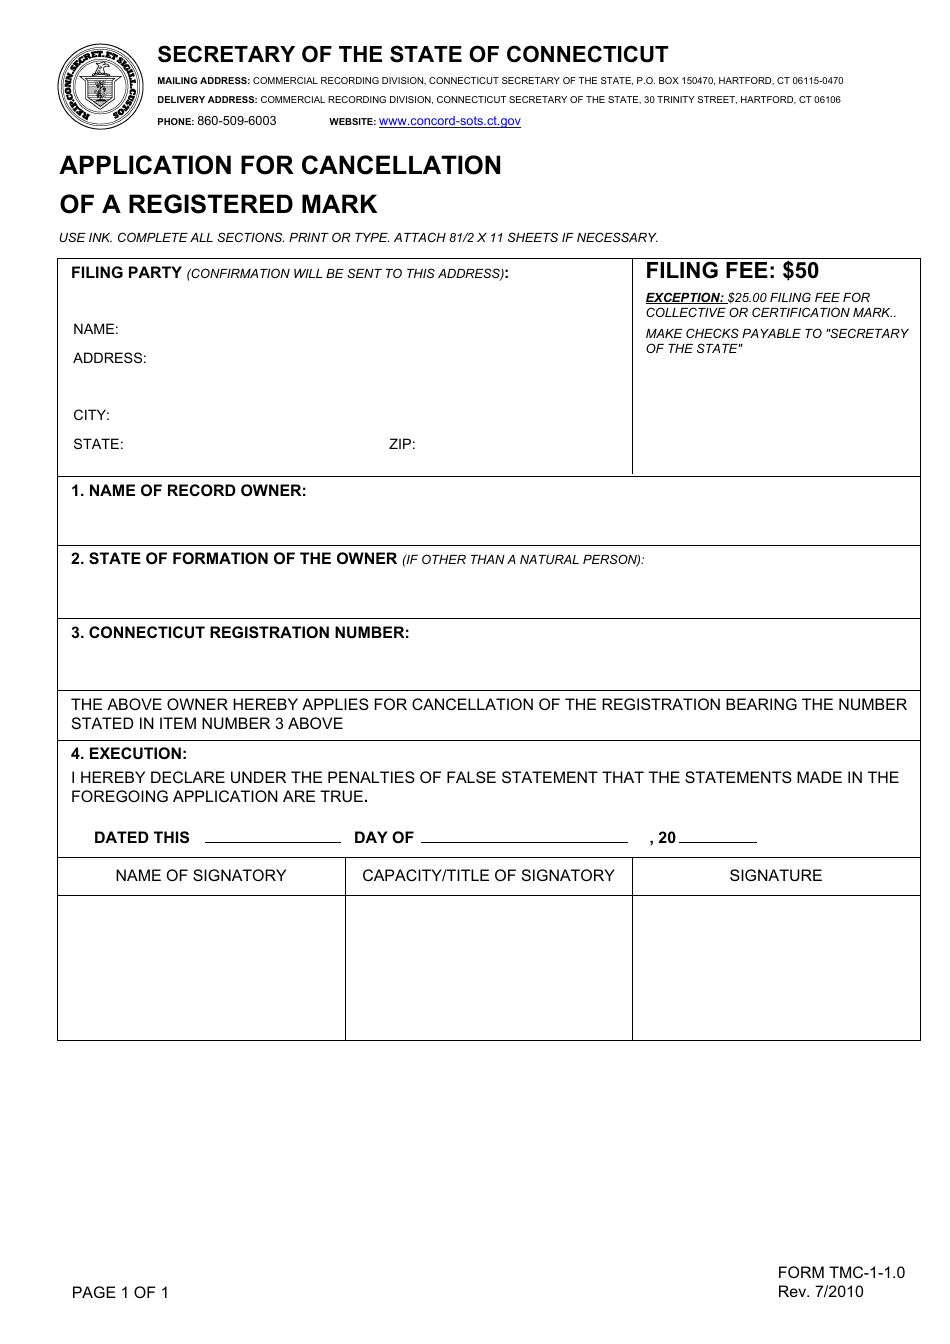 Form TMC-1-1.0 Application for Cancellation of a Registered Mark - Connecticut, Page 1